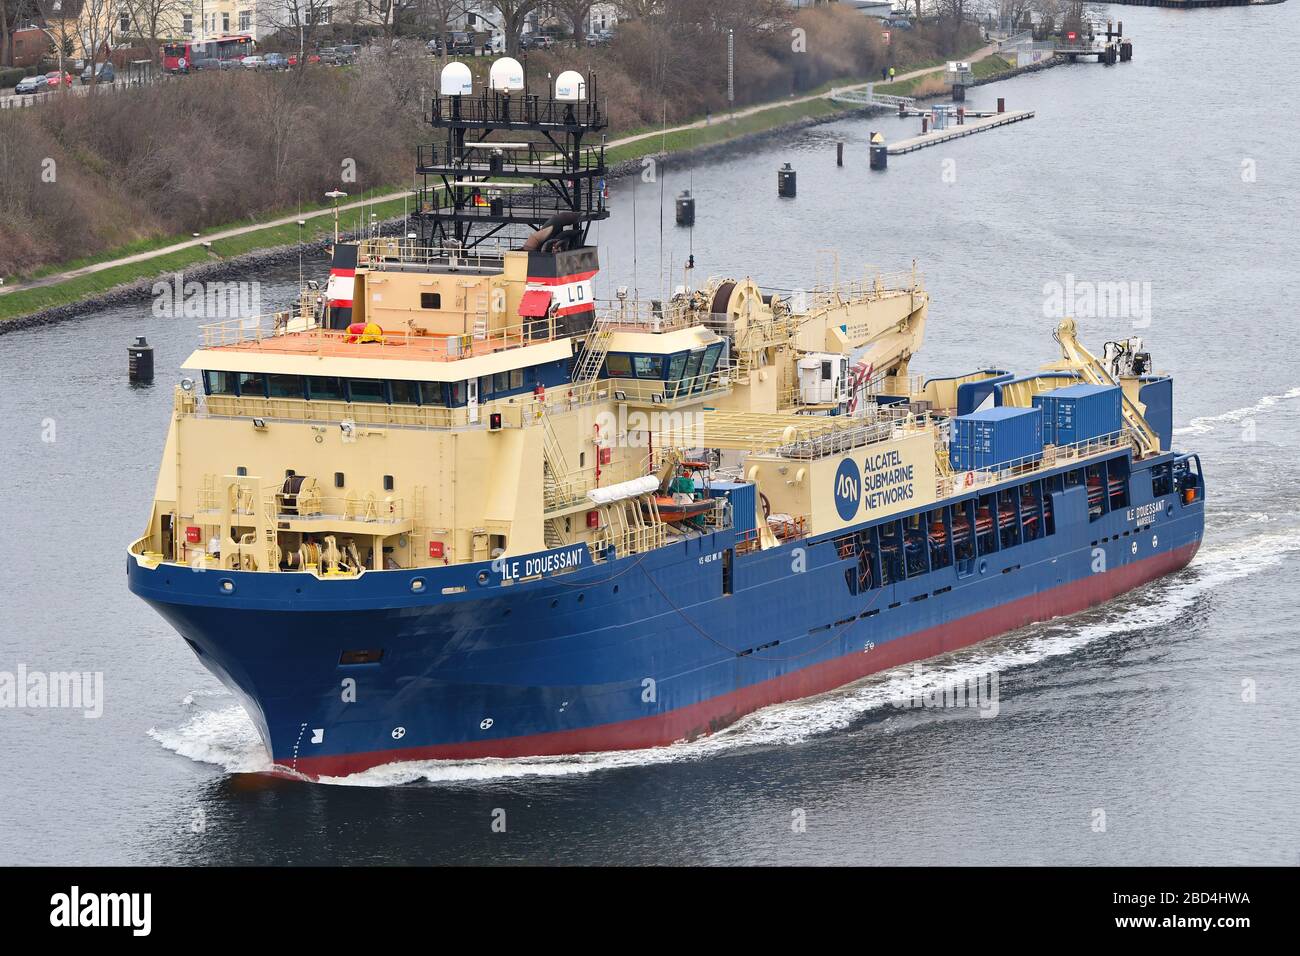 Cable Repair Ship / Cable Layer Ile d'Ouessant passing the Kiel Canal after conversion from Offshore Supply Ship Stock Photo